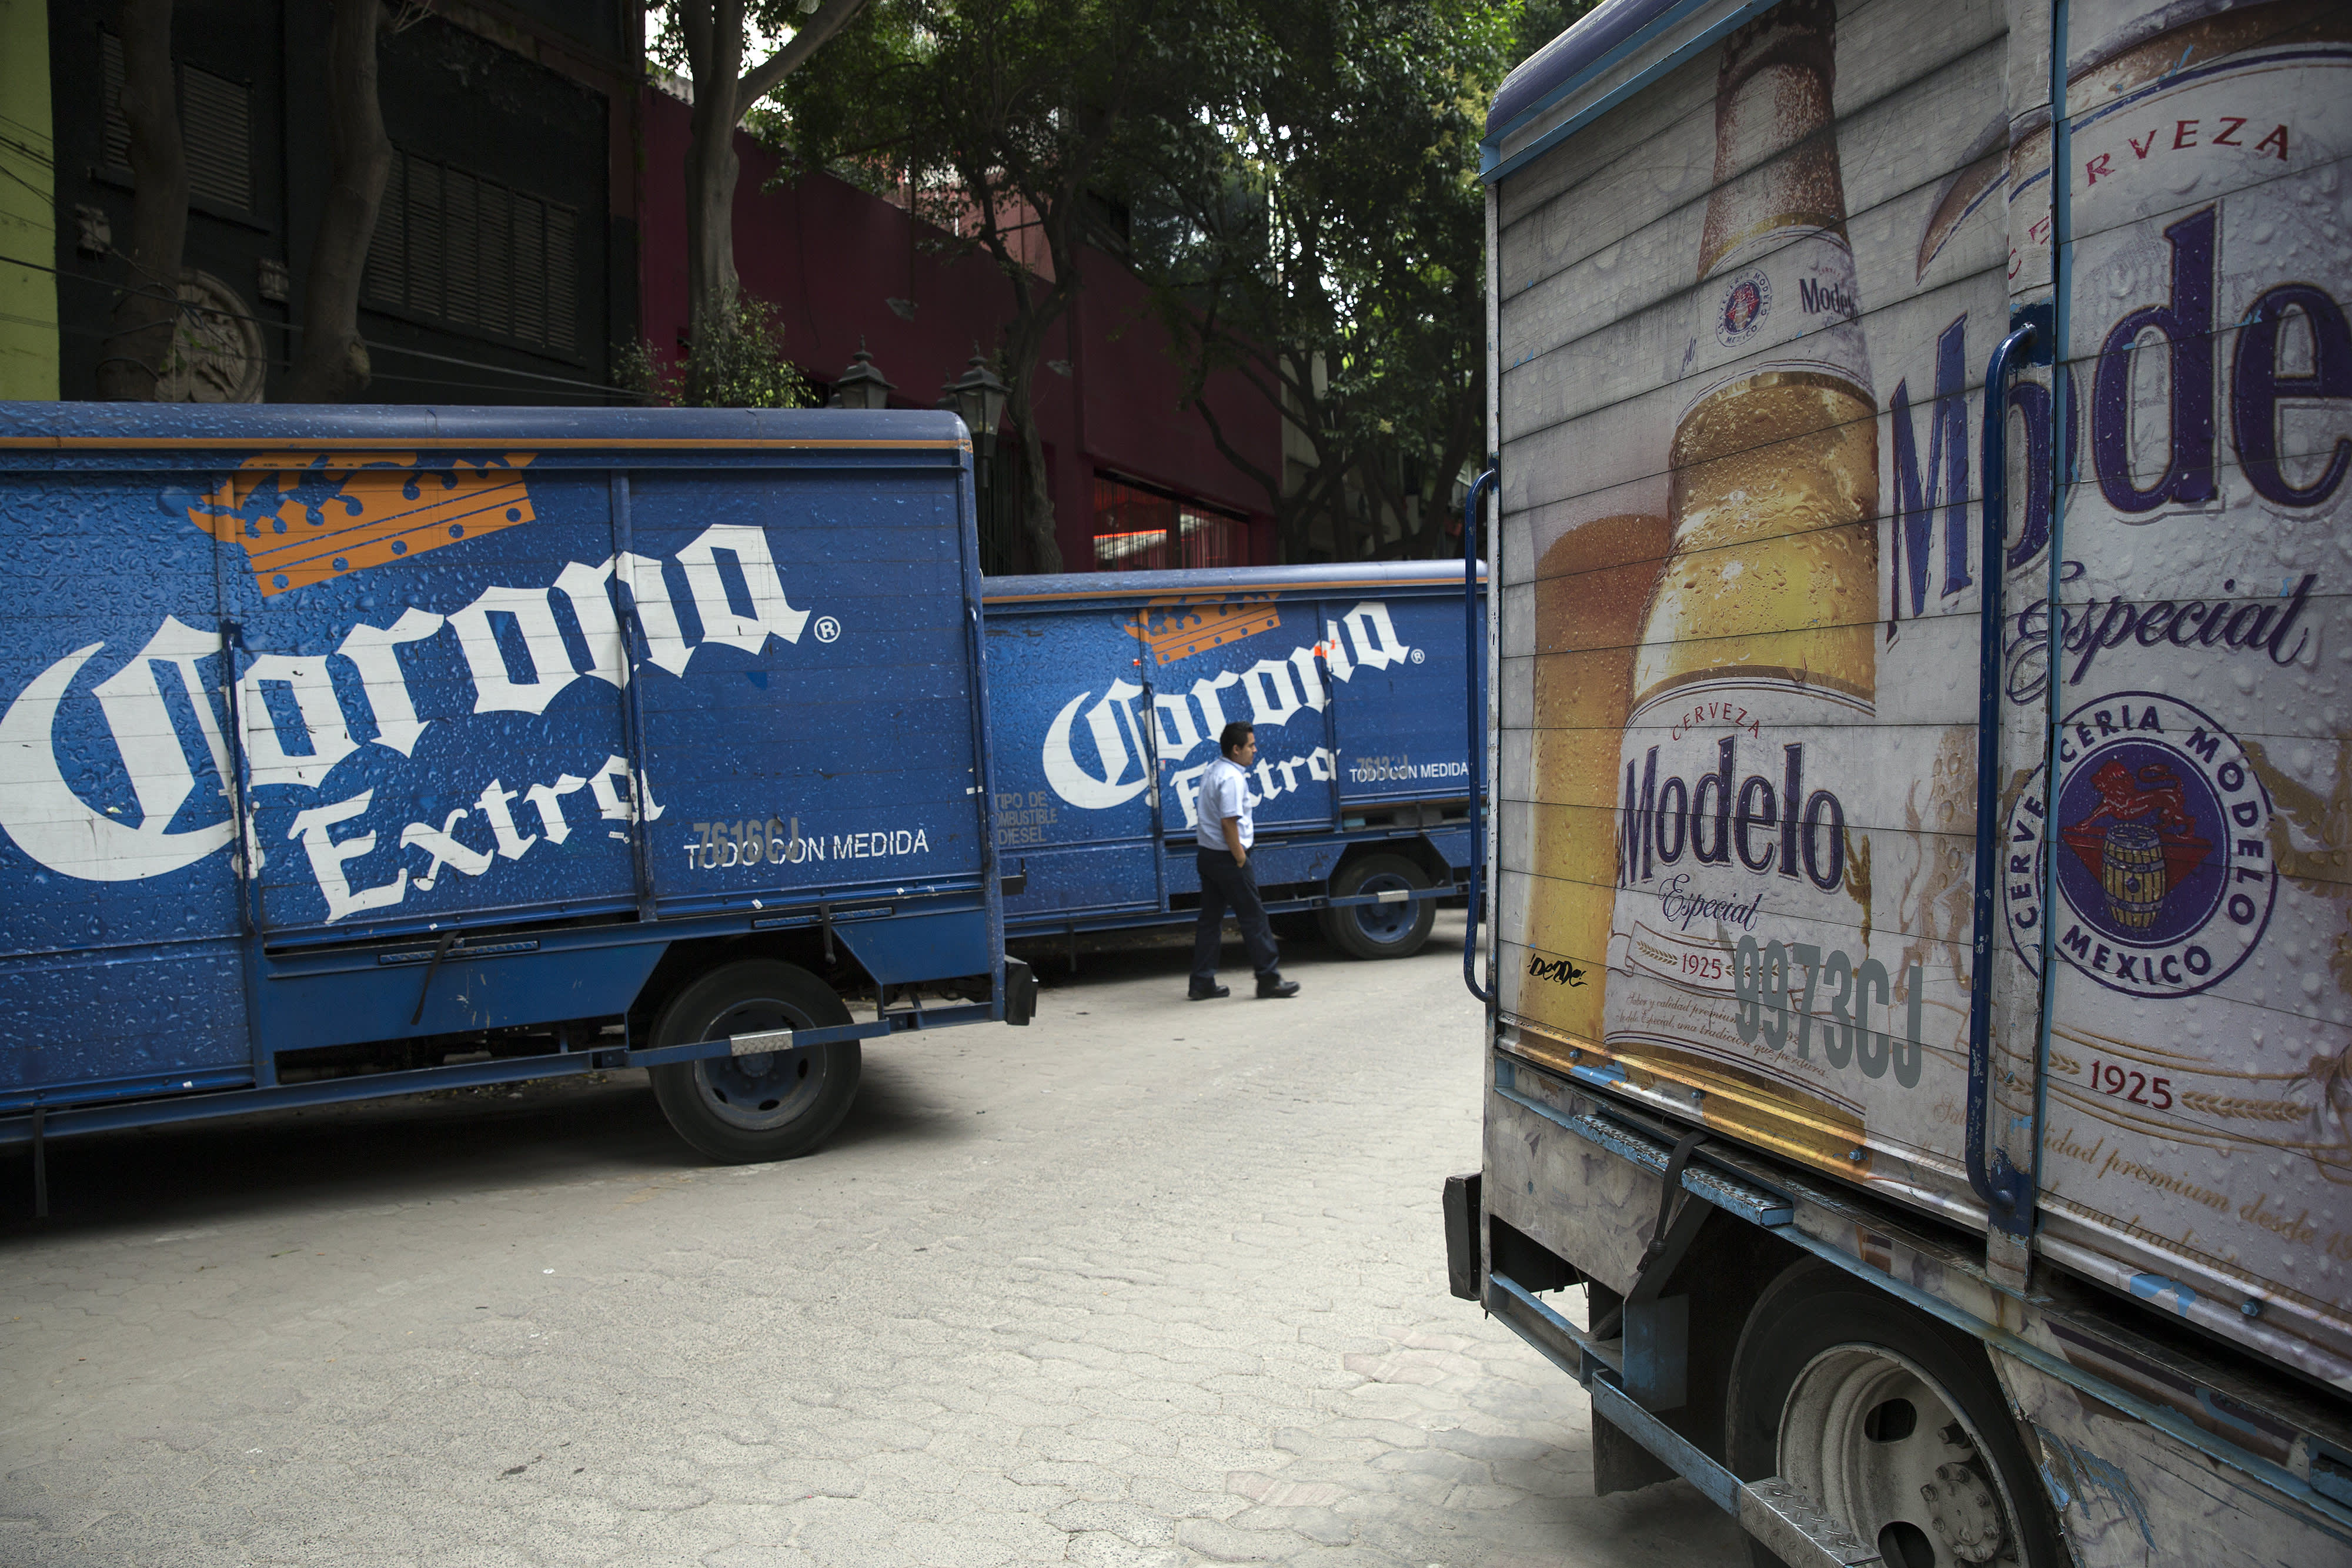 Modelo beer maker set to deliver a strong Q3, as the Club holding dominates the high-end market